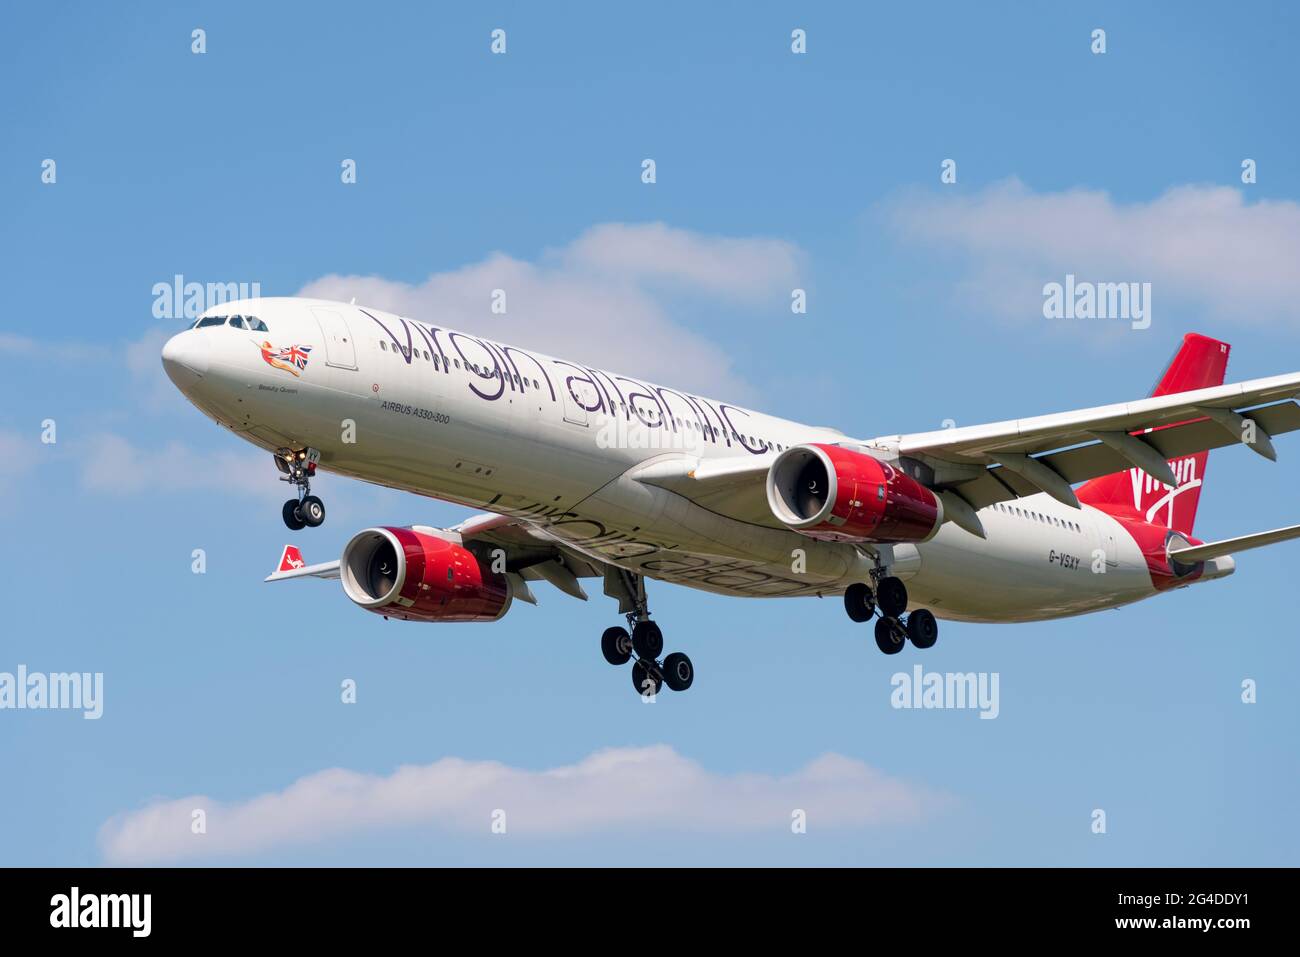 Virgin Atlantic Airbus A330 airliner jet plane G-VSXY named Beauty Queen coming in on finals to land at London Heathrow Airport, UK. Virgin plane Stock Photo